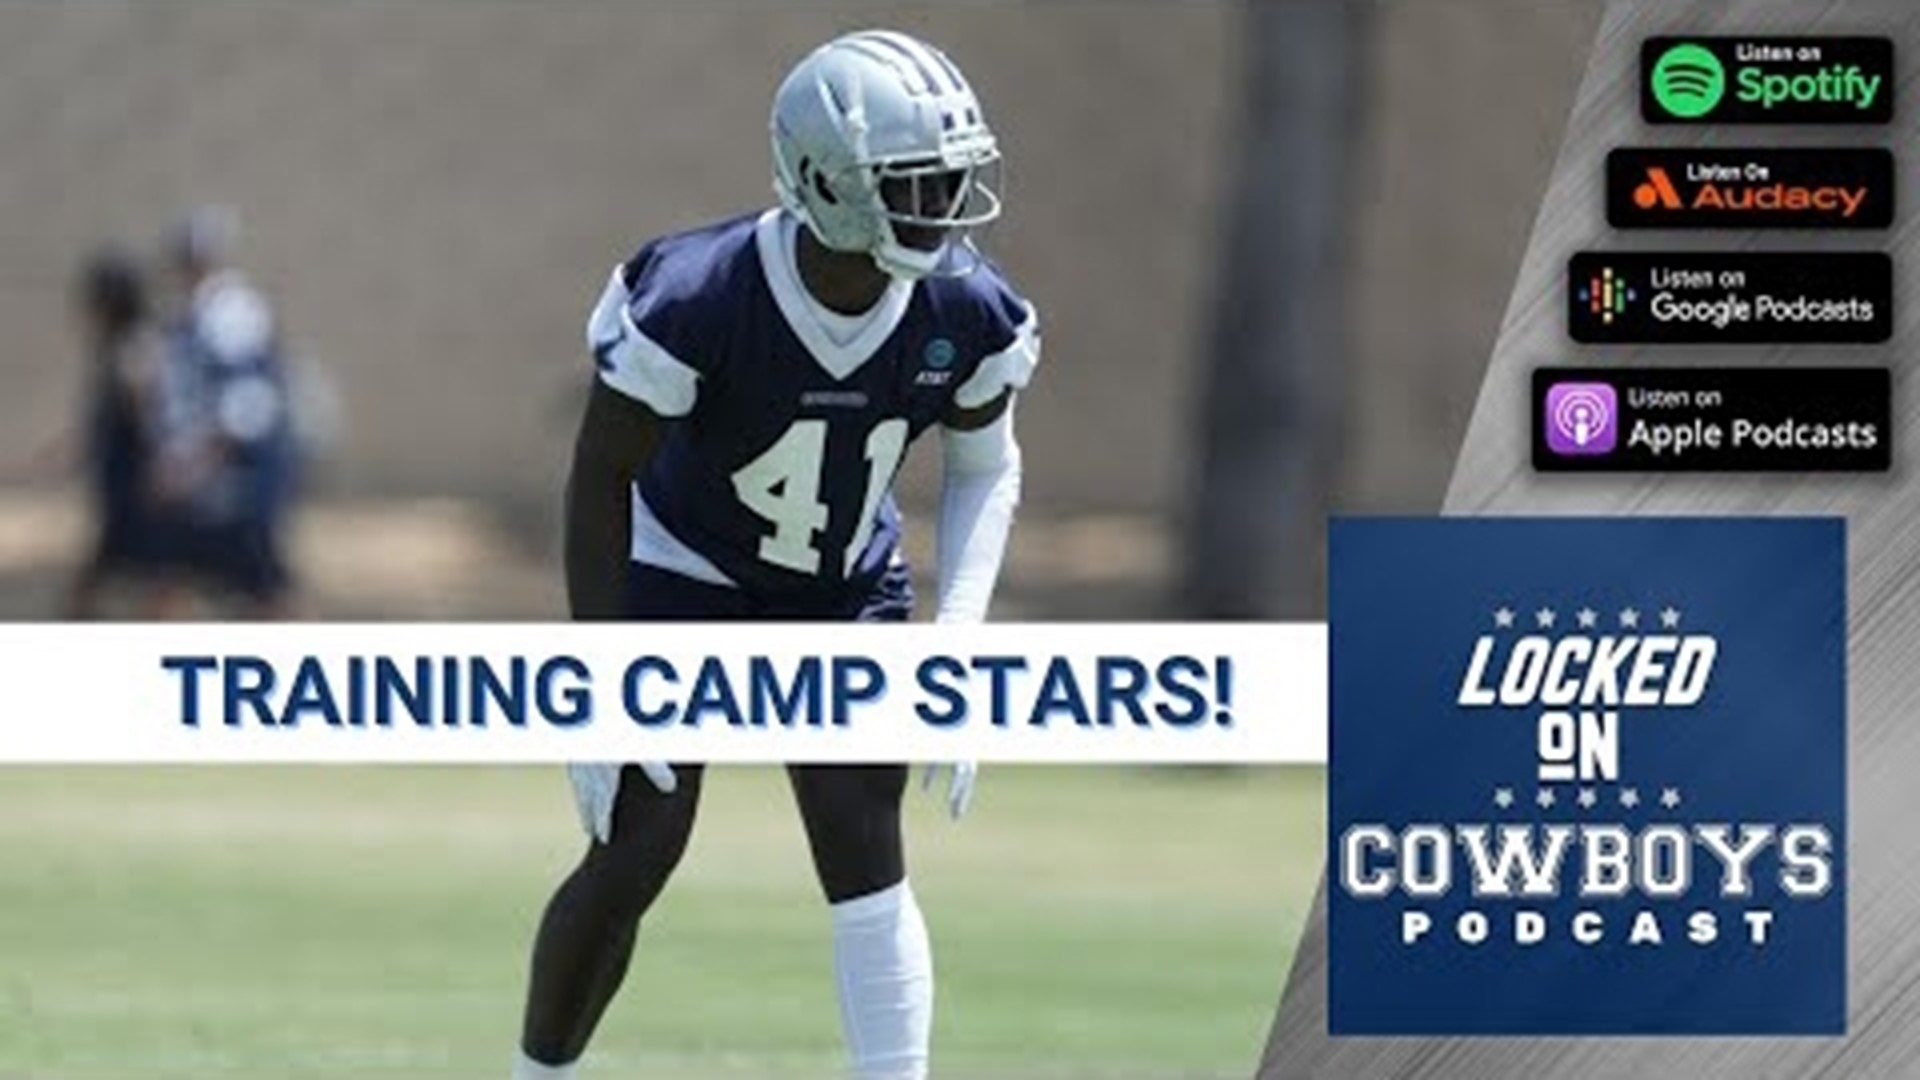 Marcus Mosher and Landon McCool of Locked On Cowboys discuss four players who have surprised during training camp practices so far